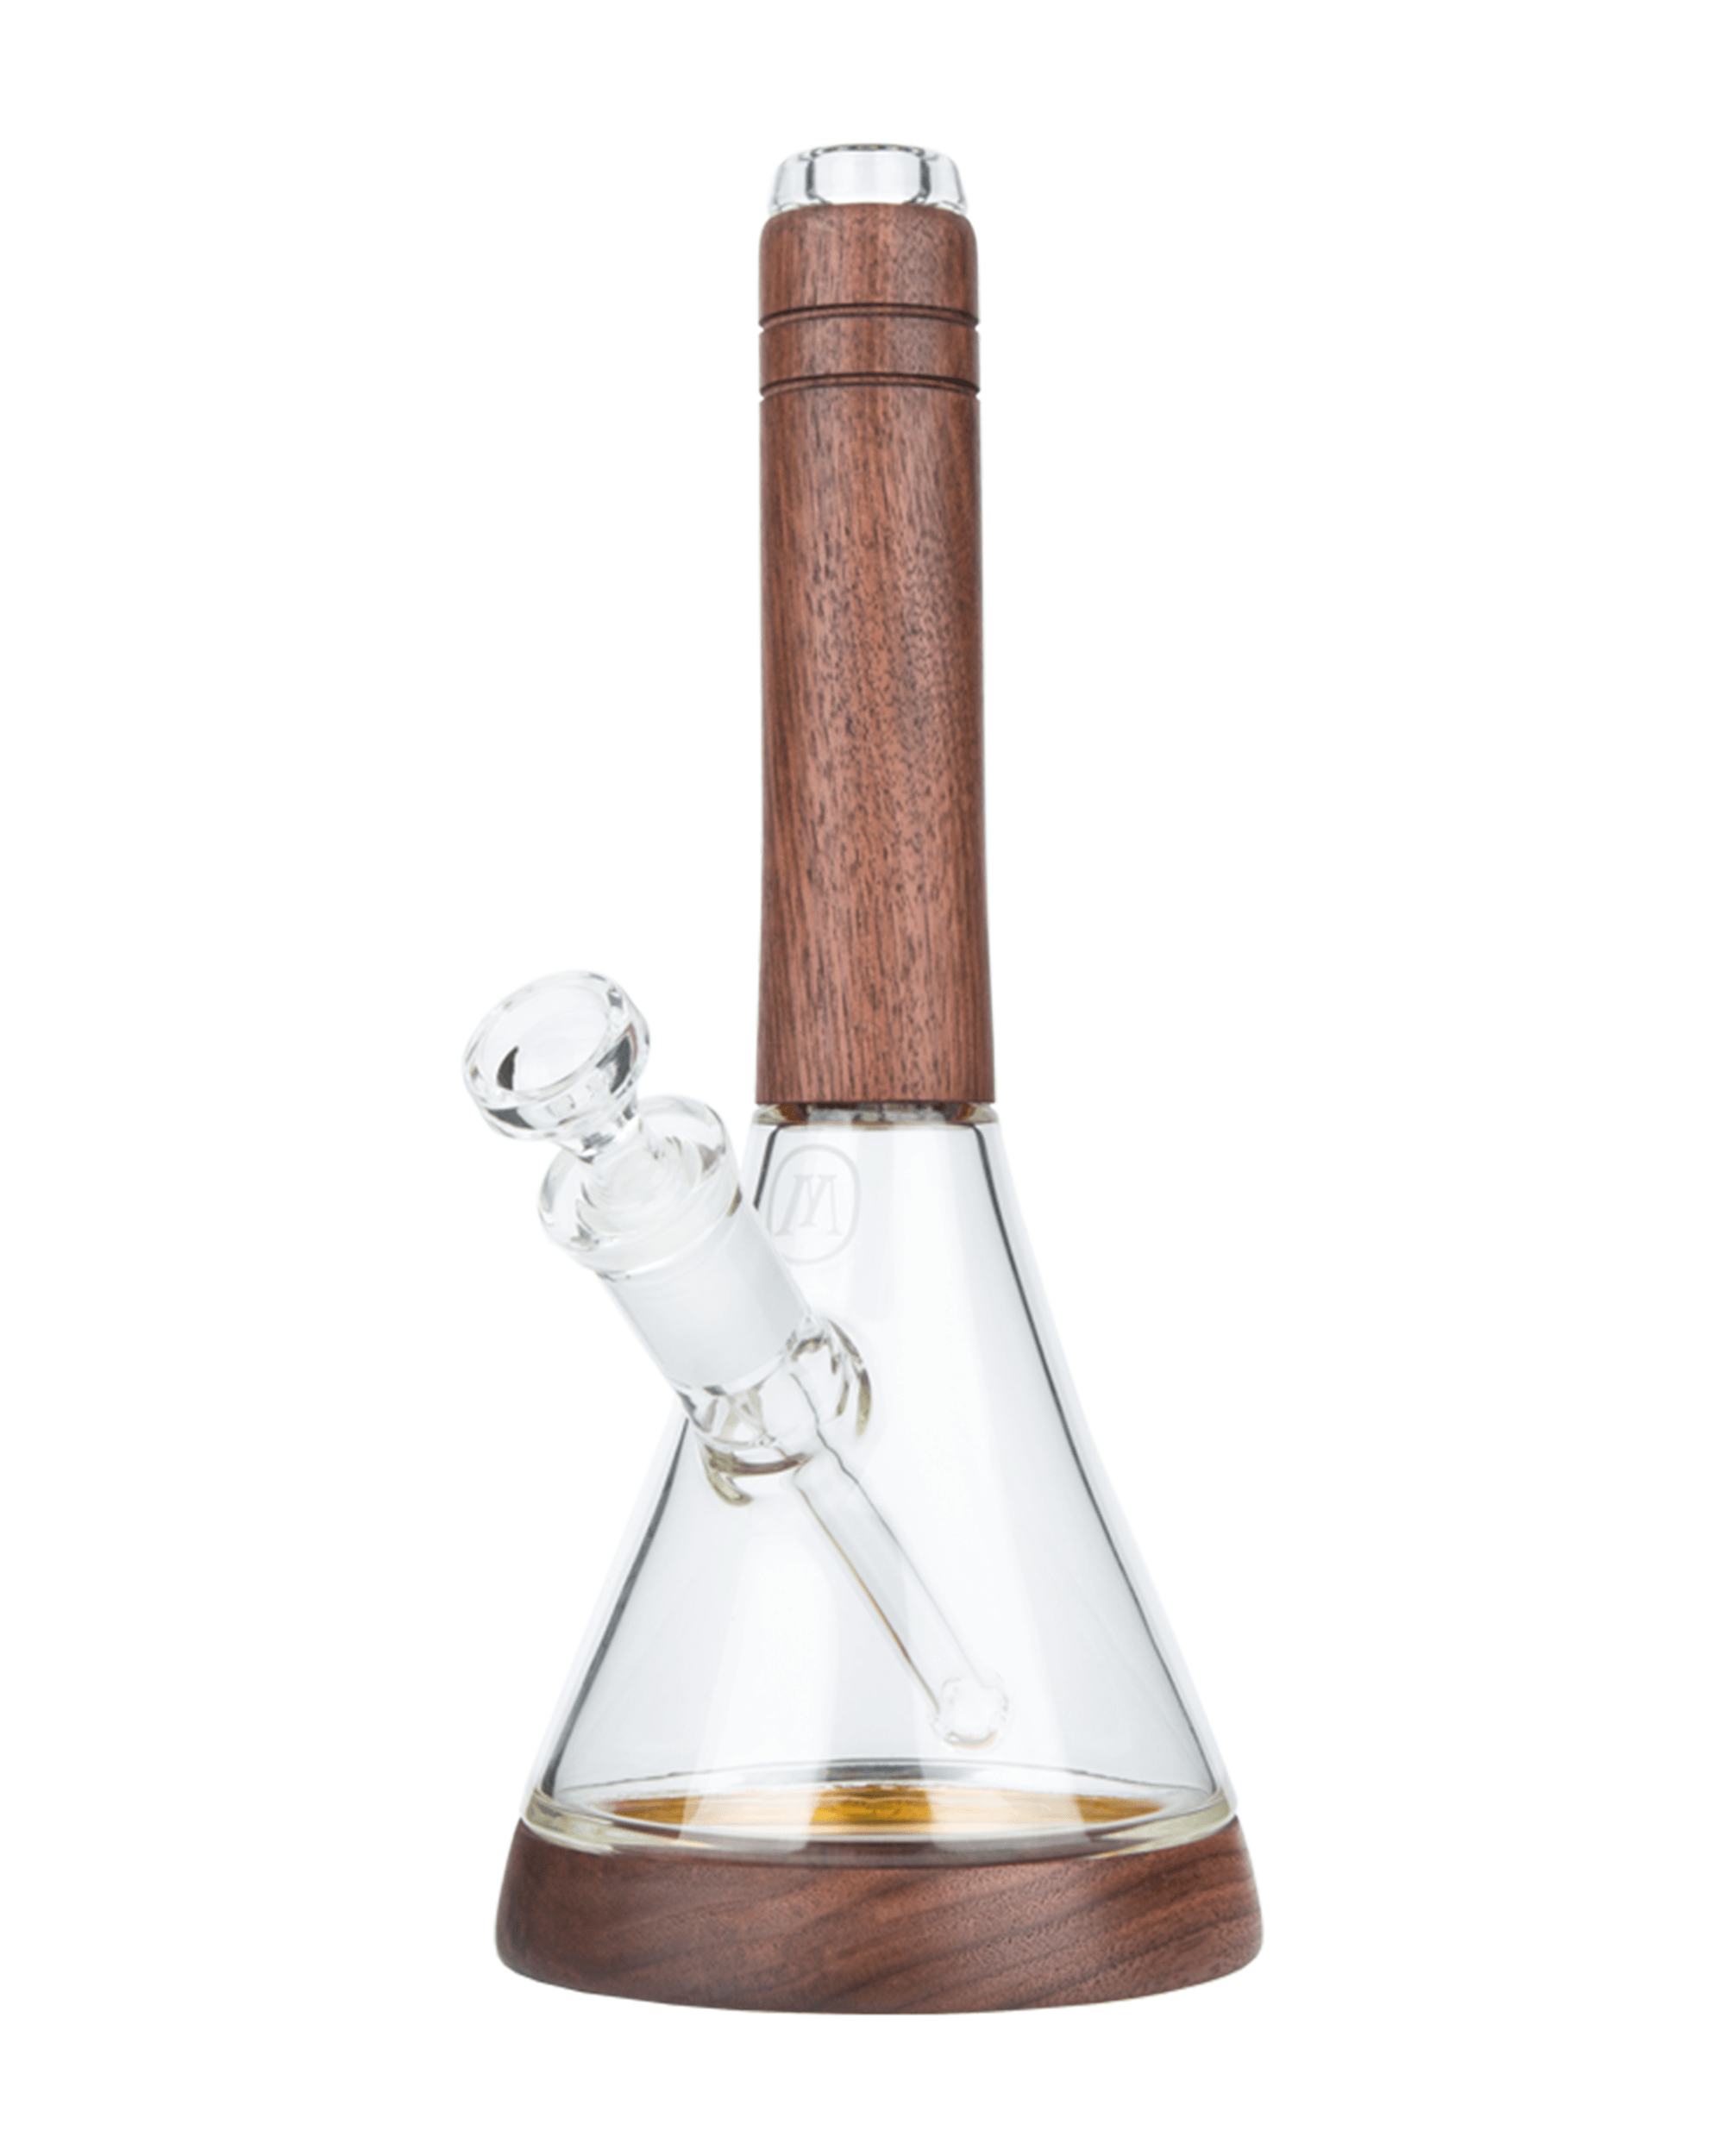 Marley Natural | Straight Glass Beaker Water Pipe | 12in Tall - 14mm Bowl - Black Walnut - 1